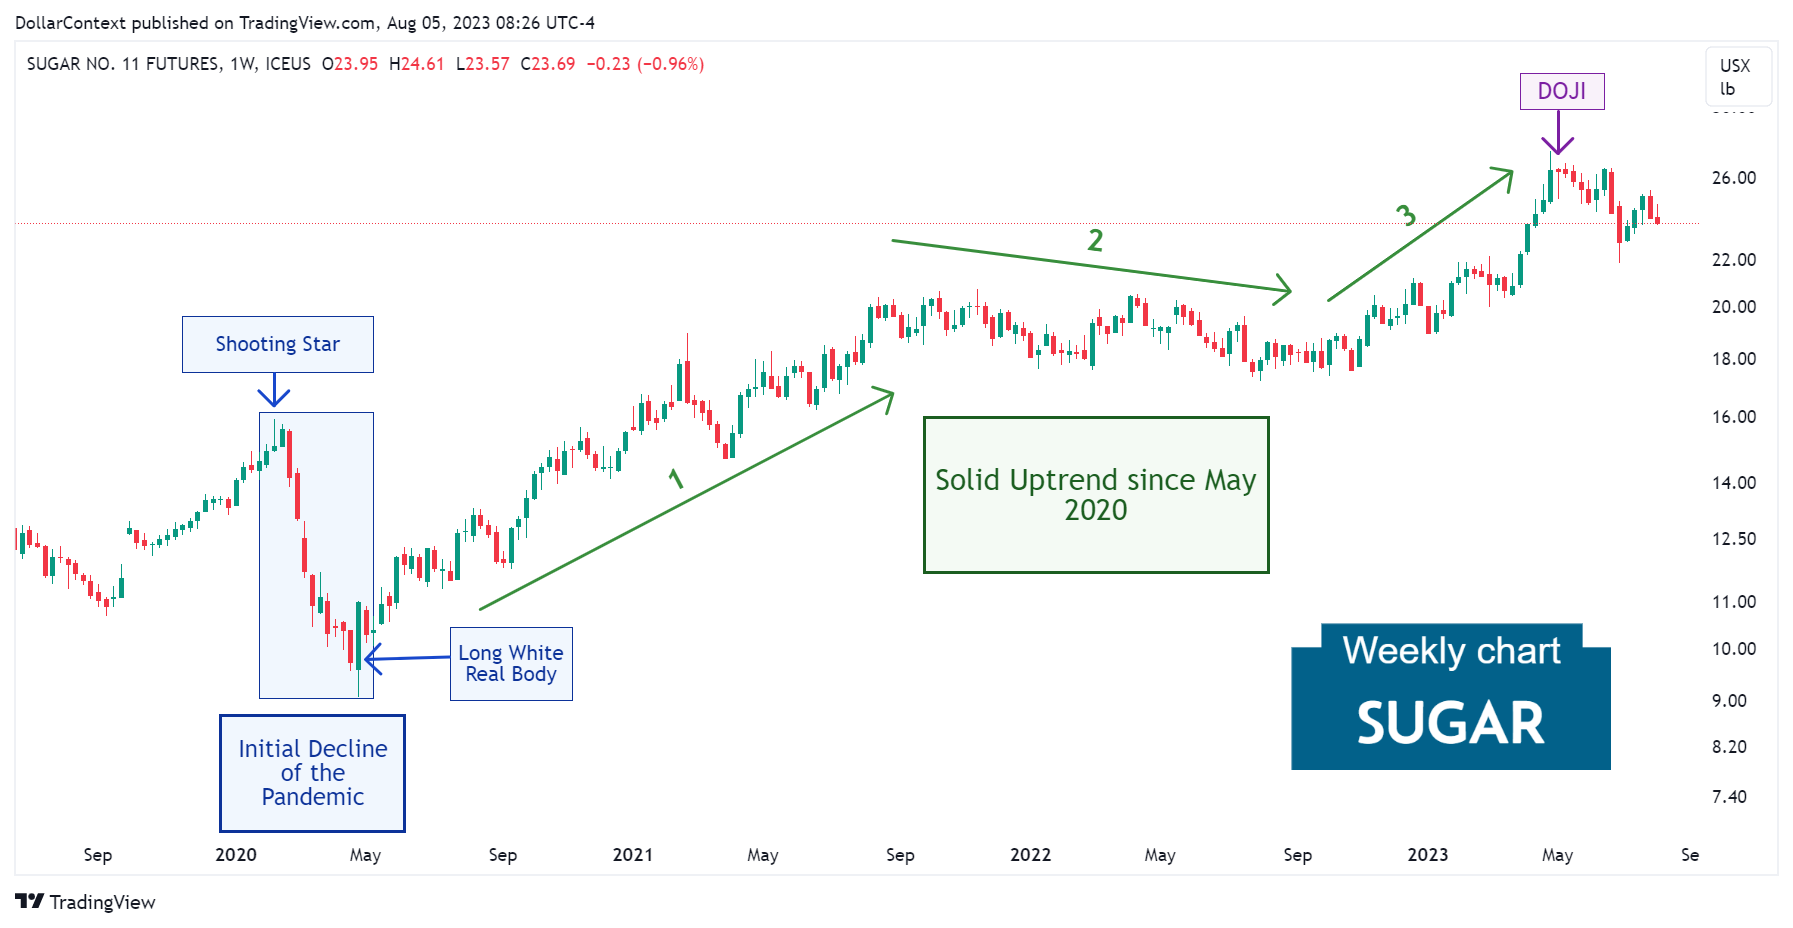 Sugar Futures: The Sustained Uptrend from 2020 to 2023 (Weekly Chart)